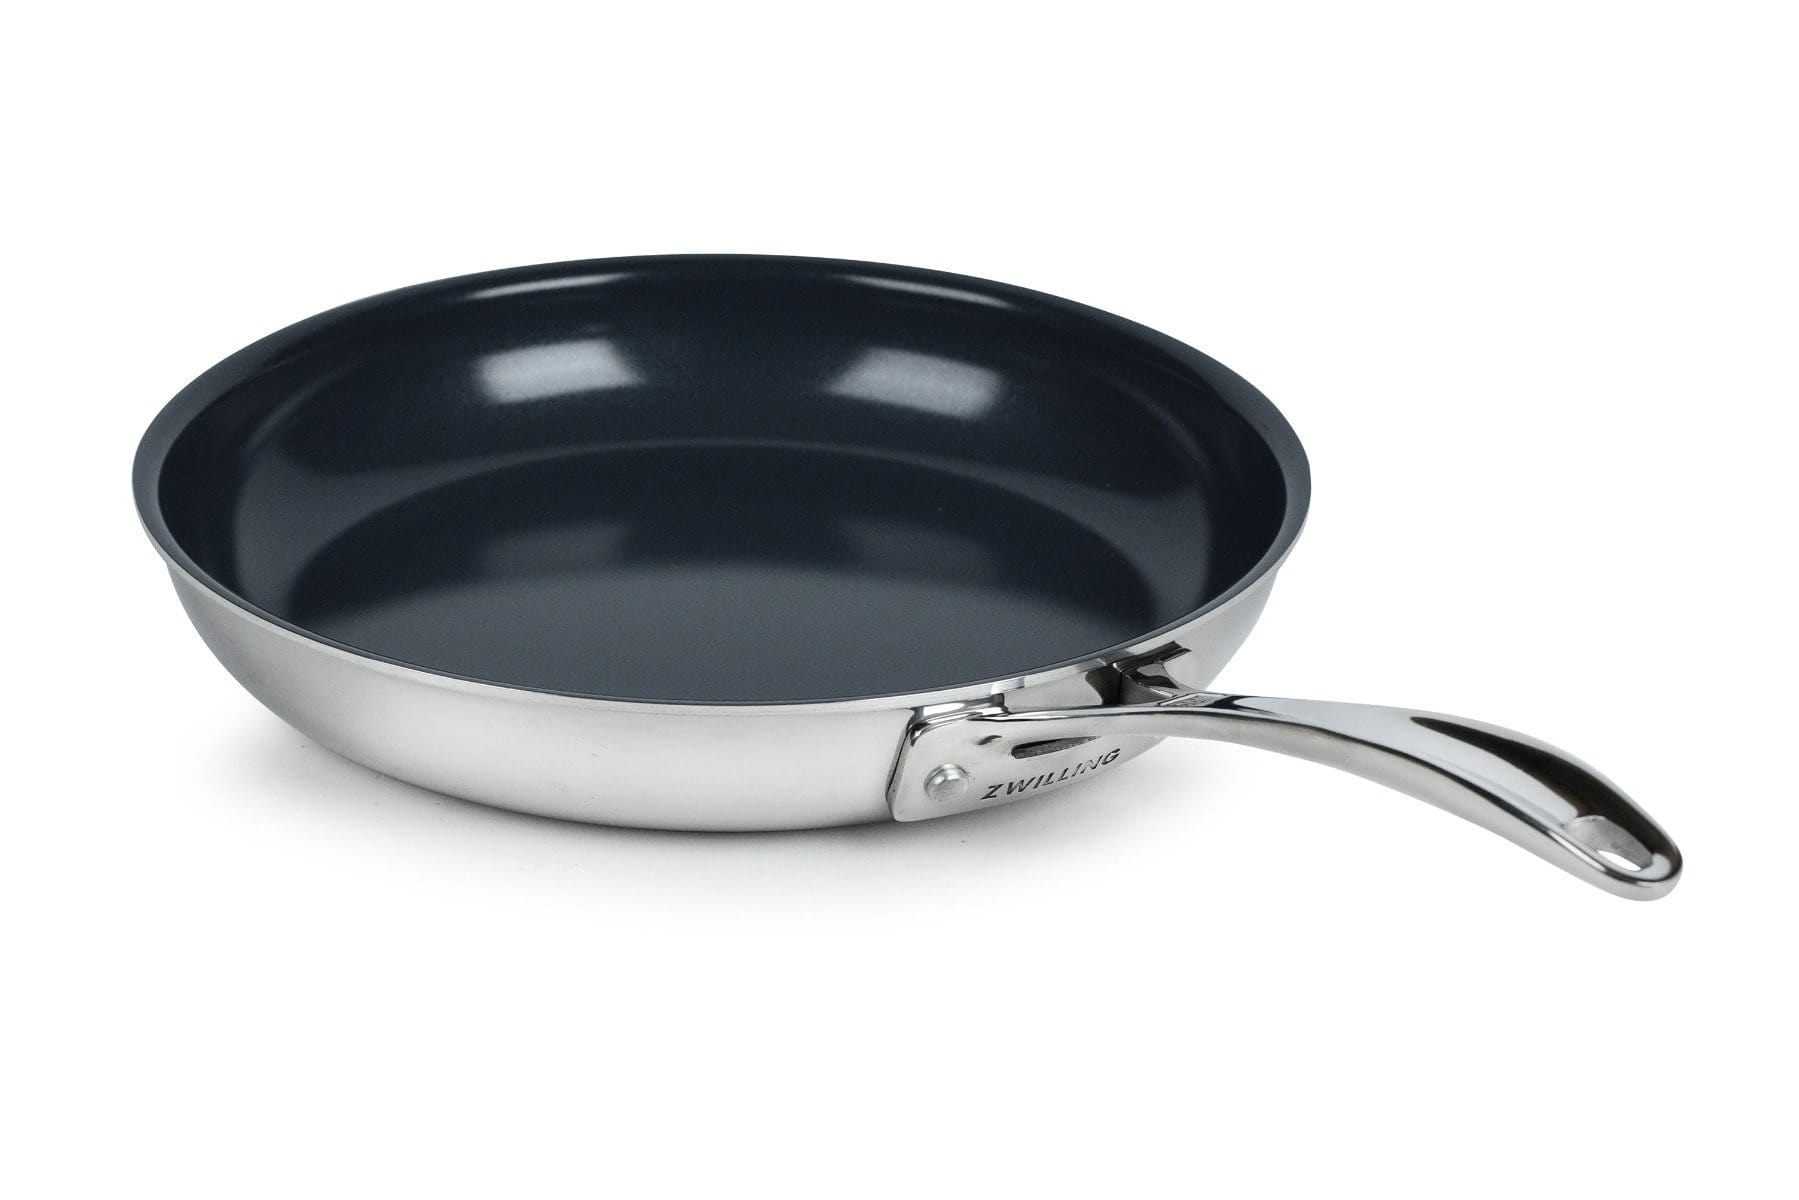 ZWILLING Clad CFX 10-inch Stainless Steel Ceramic Nonstick Fry Pan